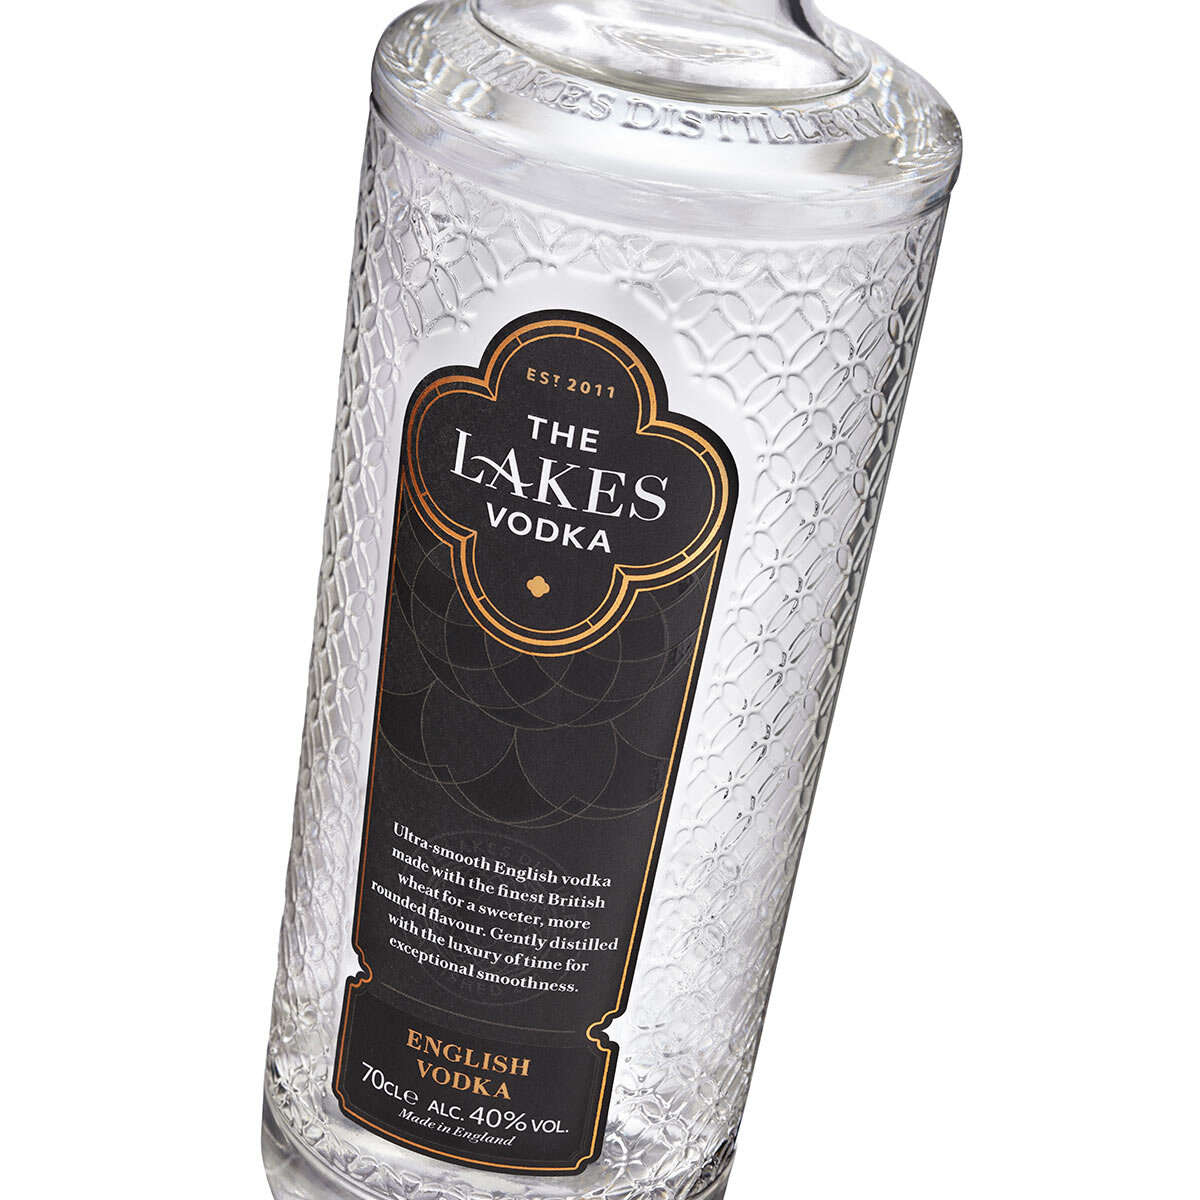 A close up of the lakes vodka label